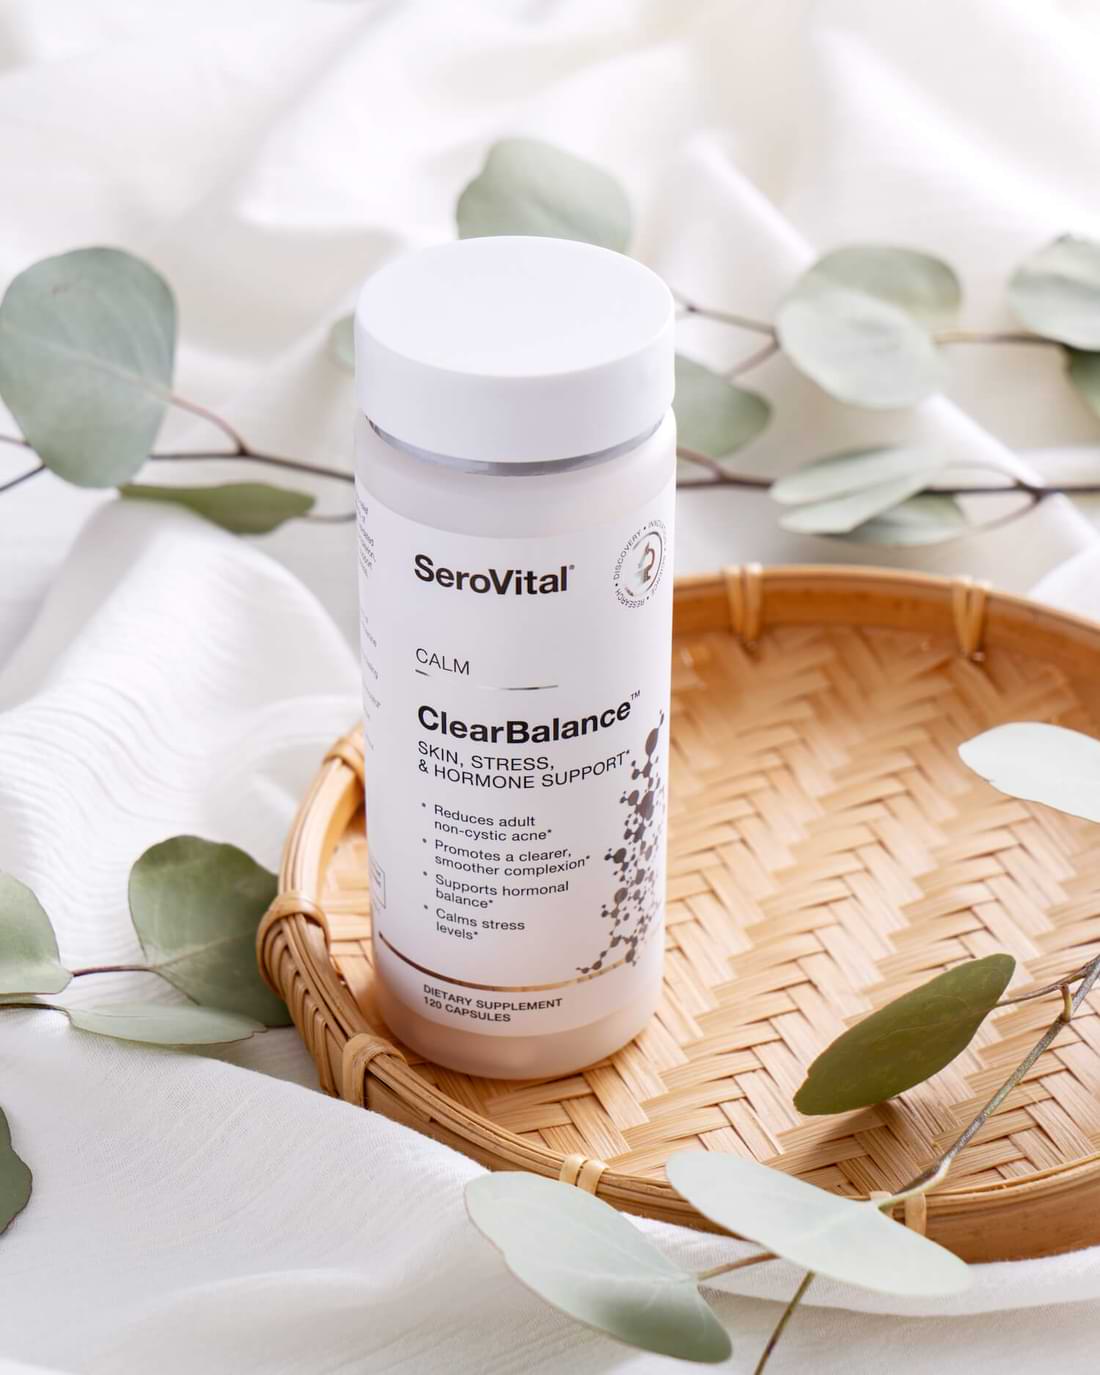 A bottle of the supplement ClearBalance on a wicker tray with leaves in the background